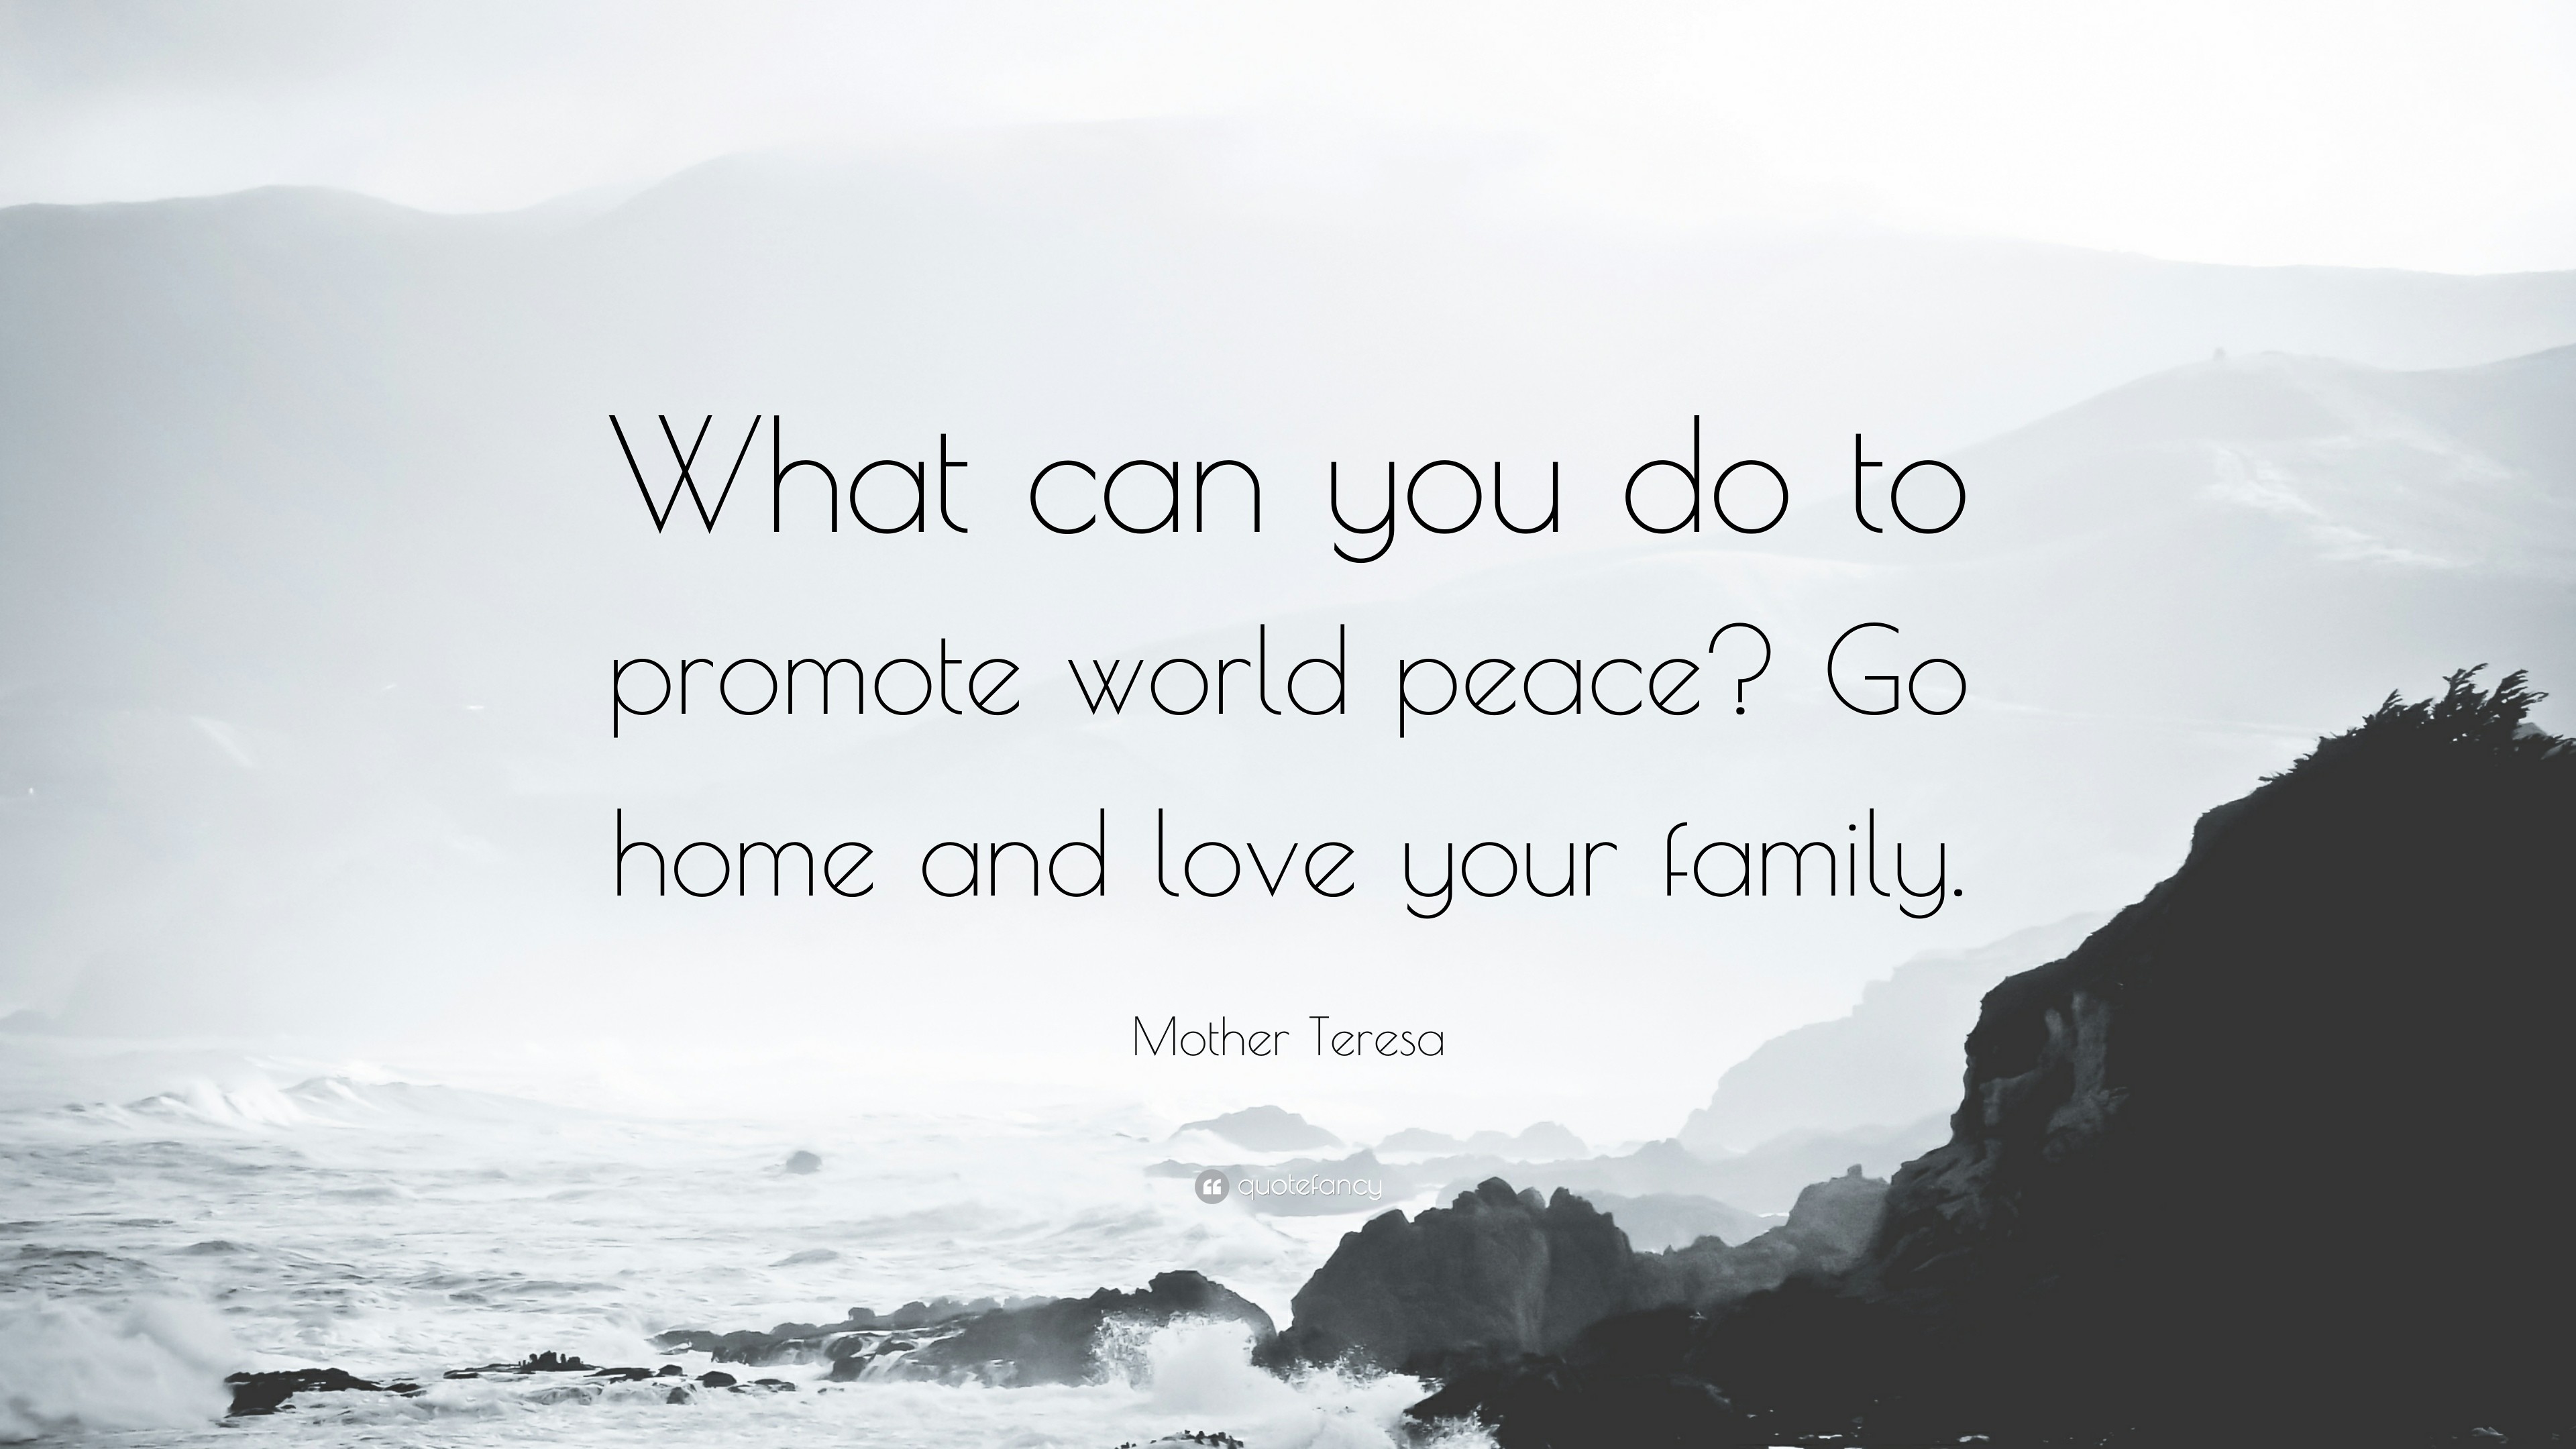 3840x2160 Mother Teresa Quote: “What can you do to promote world peace? Go home